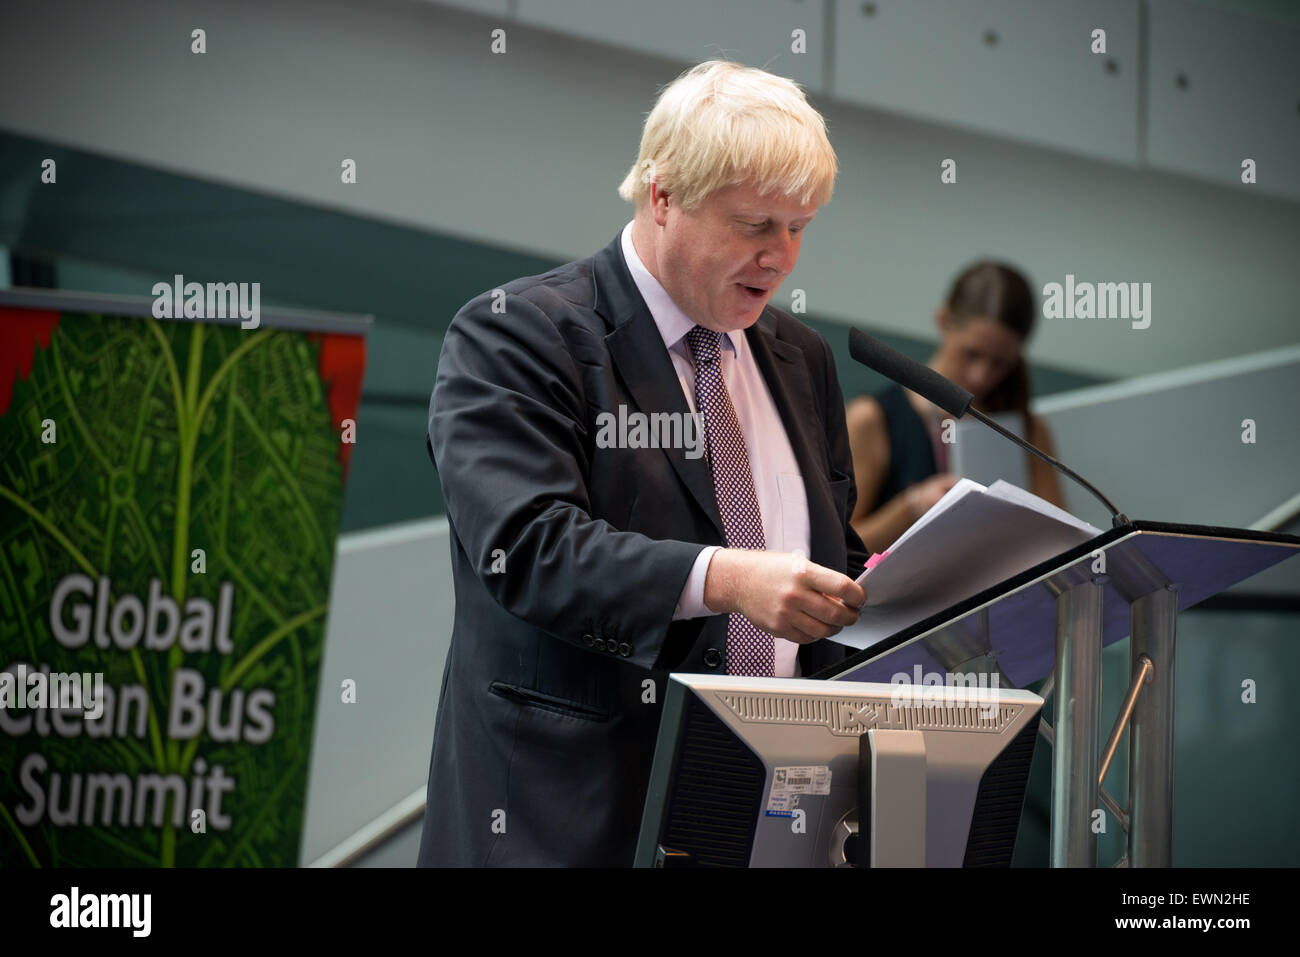 London, UK. 29th June, 2015. The C40 Cities Climate Leadership Group, now in its 10th year, connects more than 75 of the world's greatest cities. C40 Clean Bus Declaration urges cities and manufacturers to adopt innovative clean bus technologies. Mayor of London Boris Johnson was leading the summit in City Hall this afternoon. Credit:  Velar Grant/ZUMA Wire/ZUMAPRESS.com/Alamy Live News Stock Photo